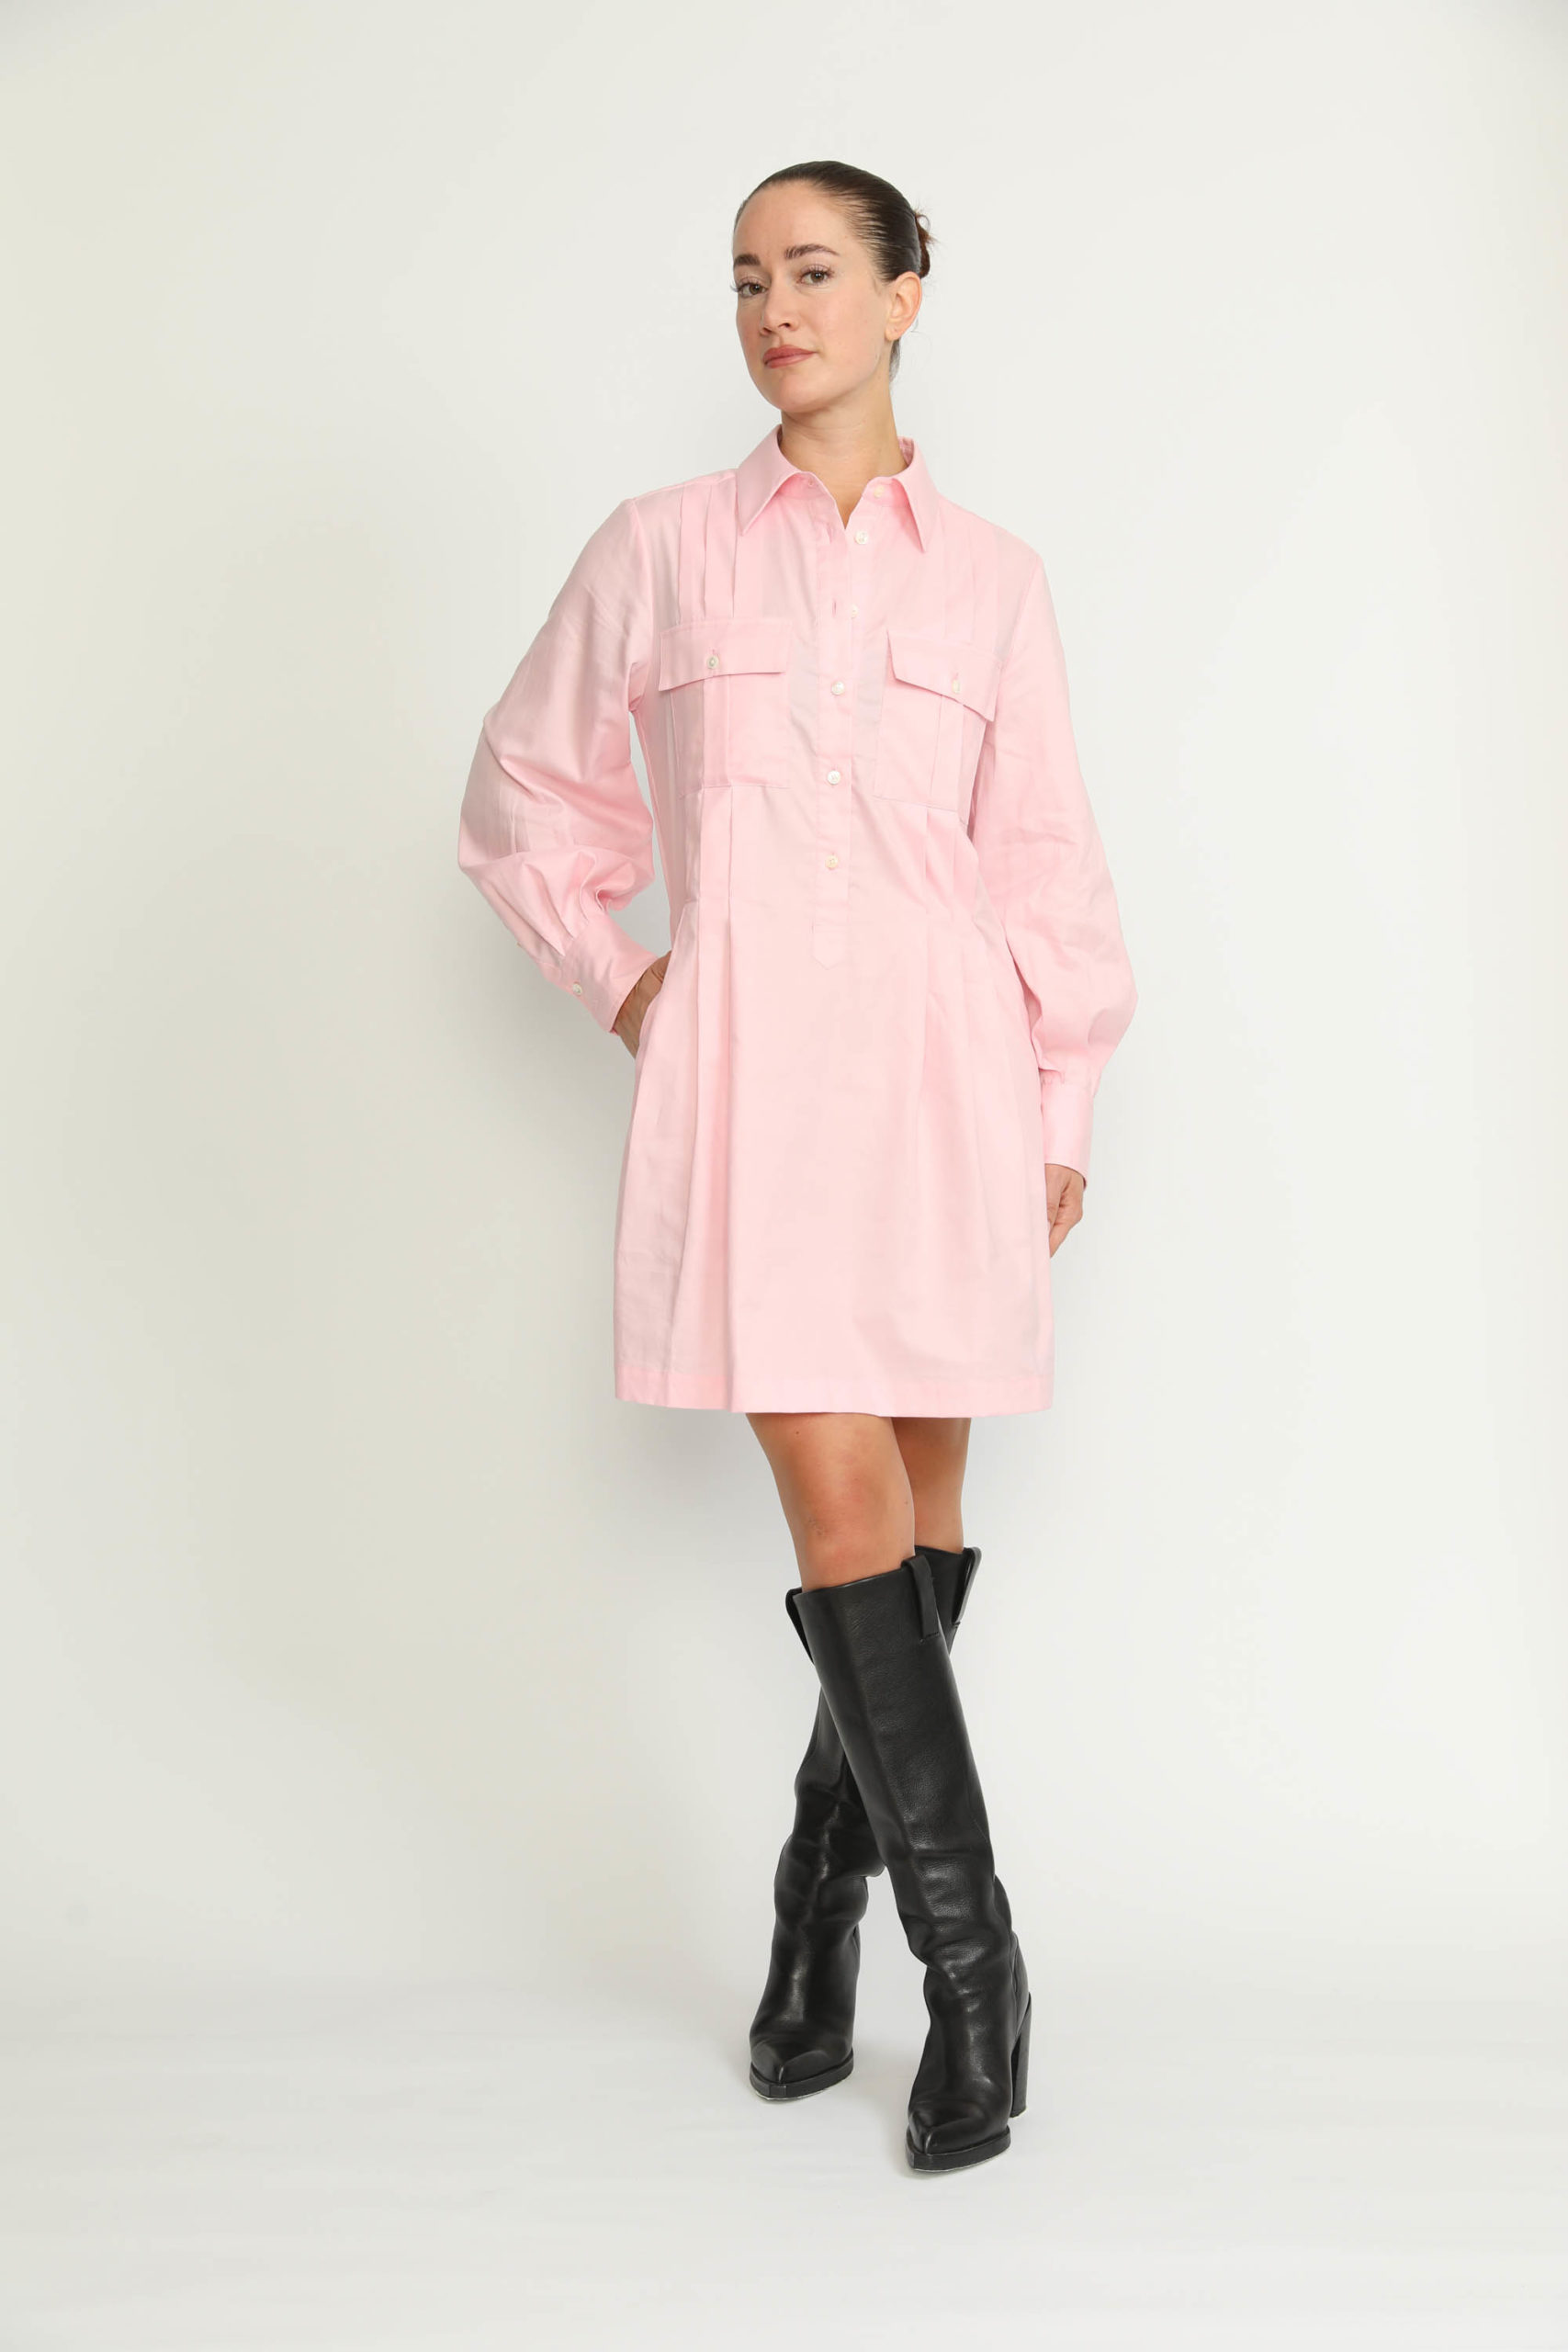 Pully Dress – Pully Short Shirt Dress in Pink Oxford0